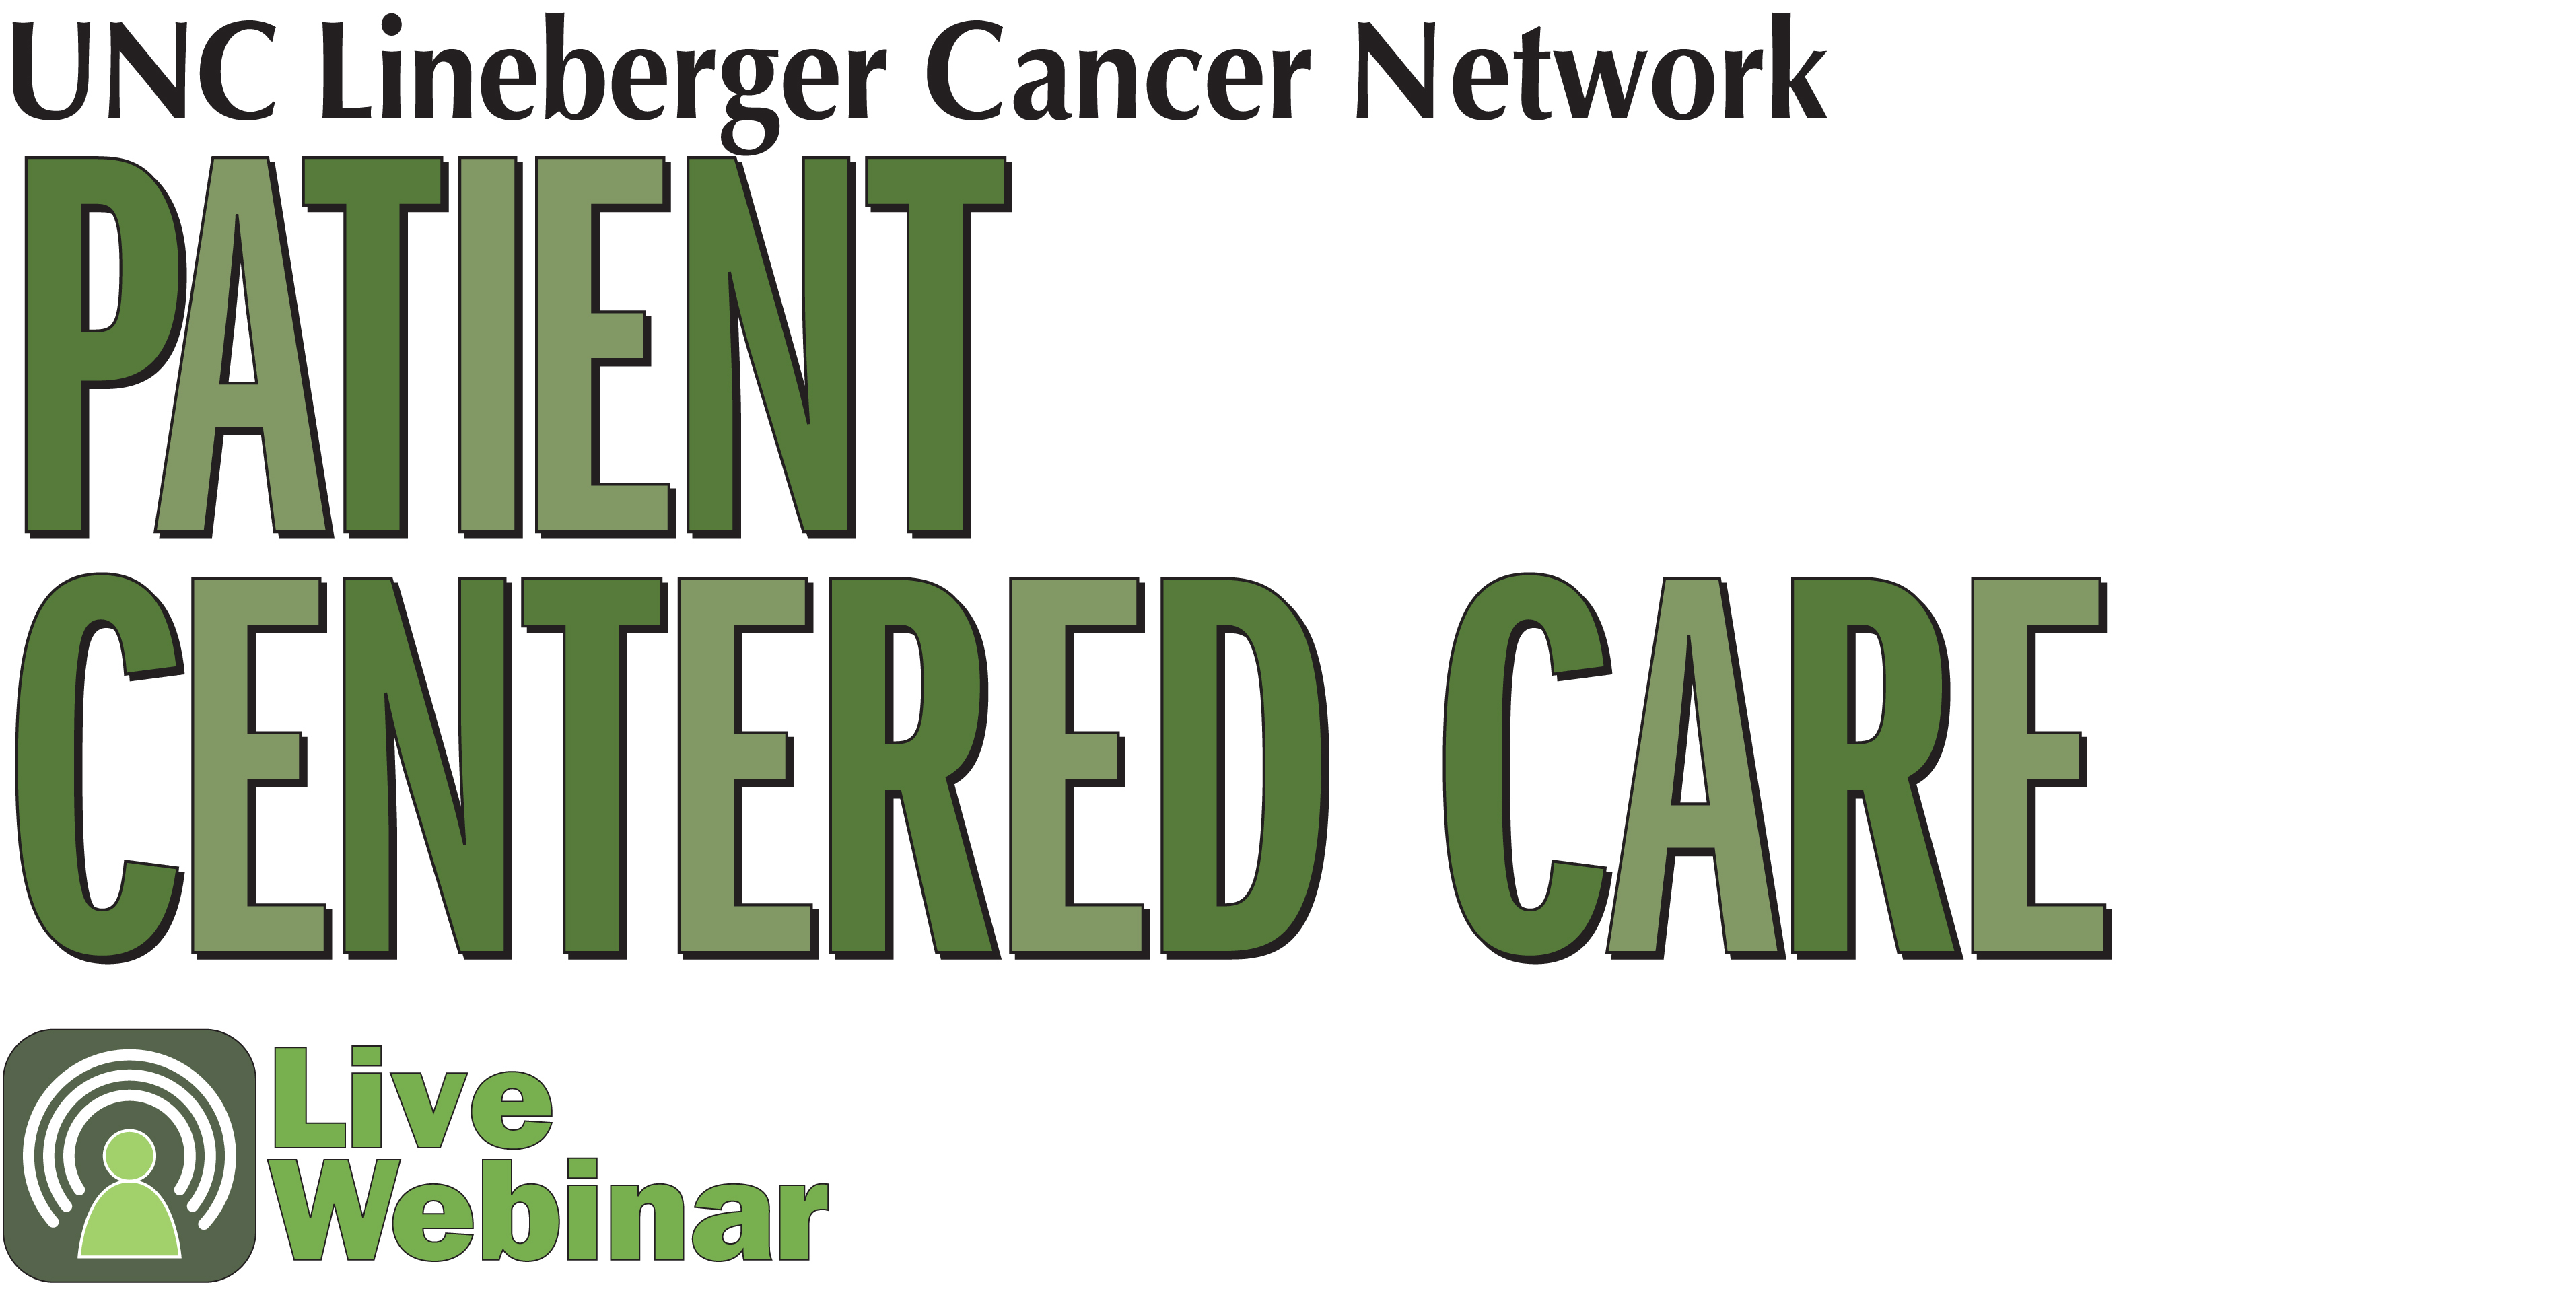 UNC Lineberger Cancer Network Presents a Patient Centered Care Lecture